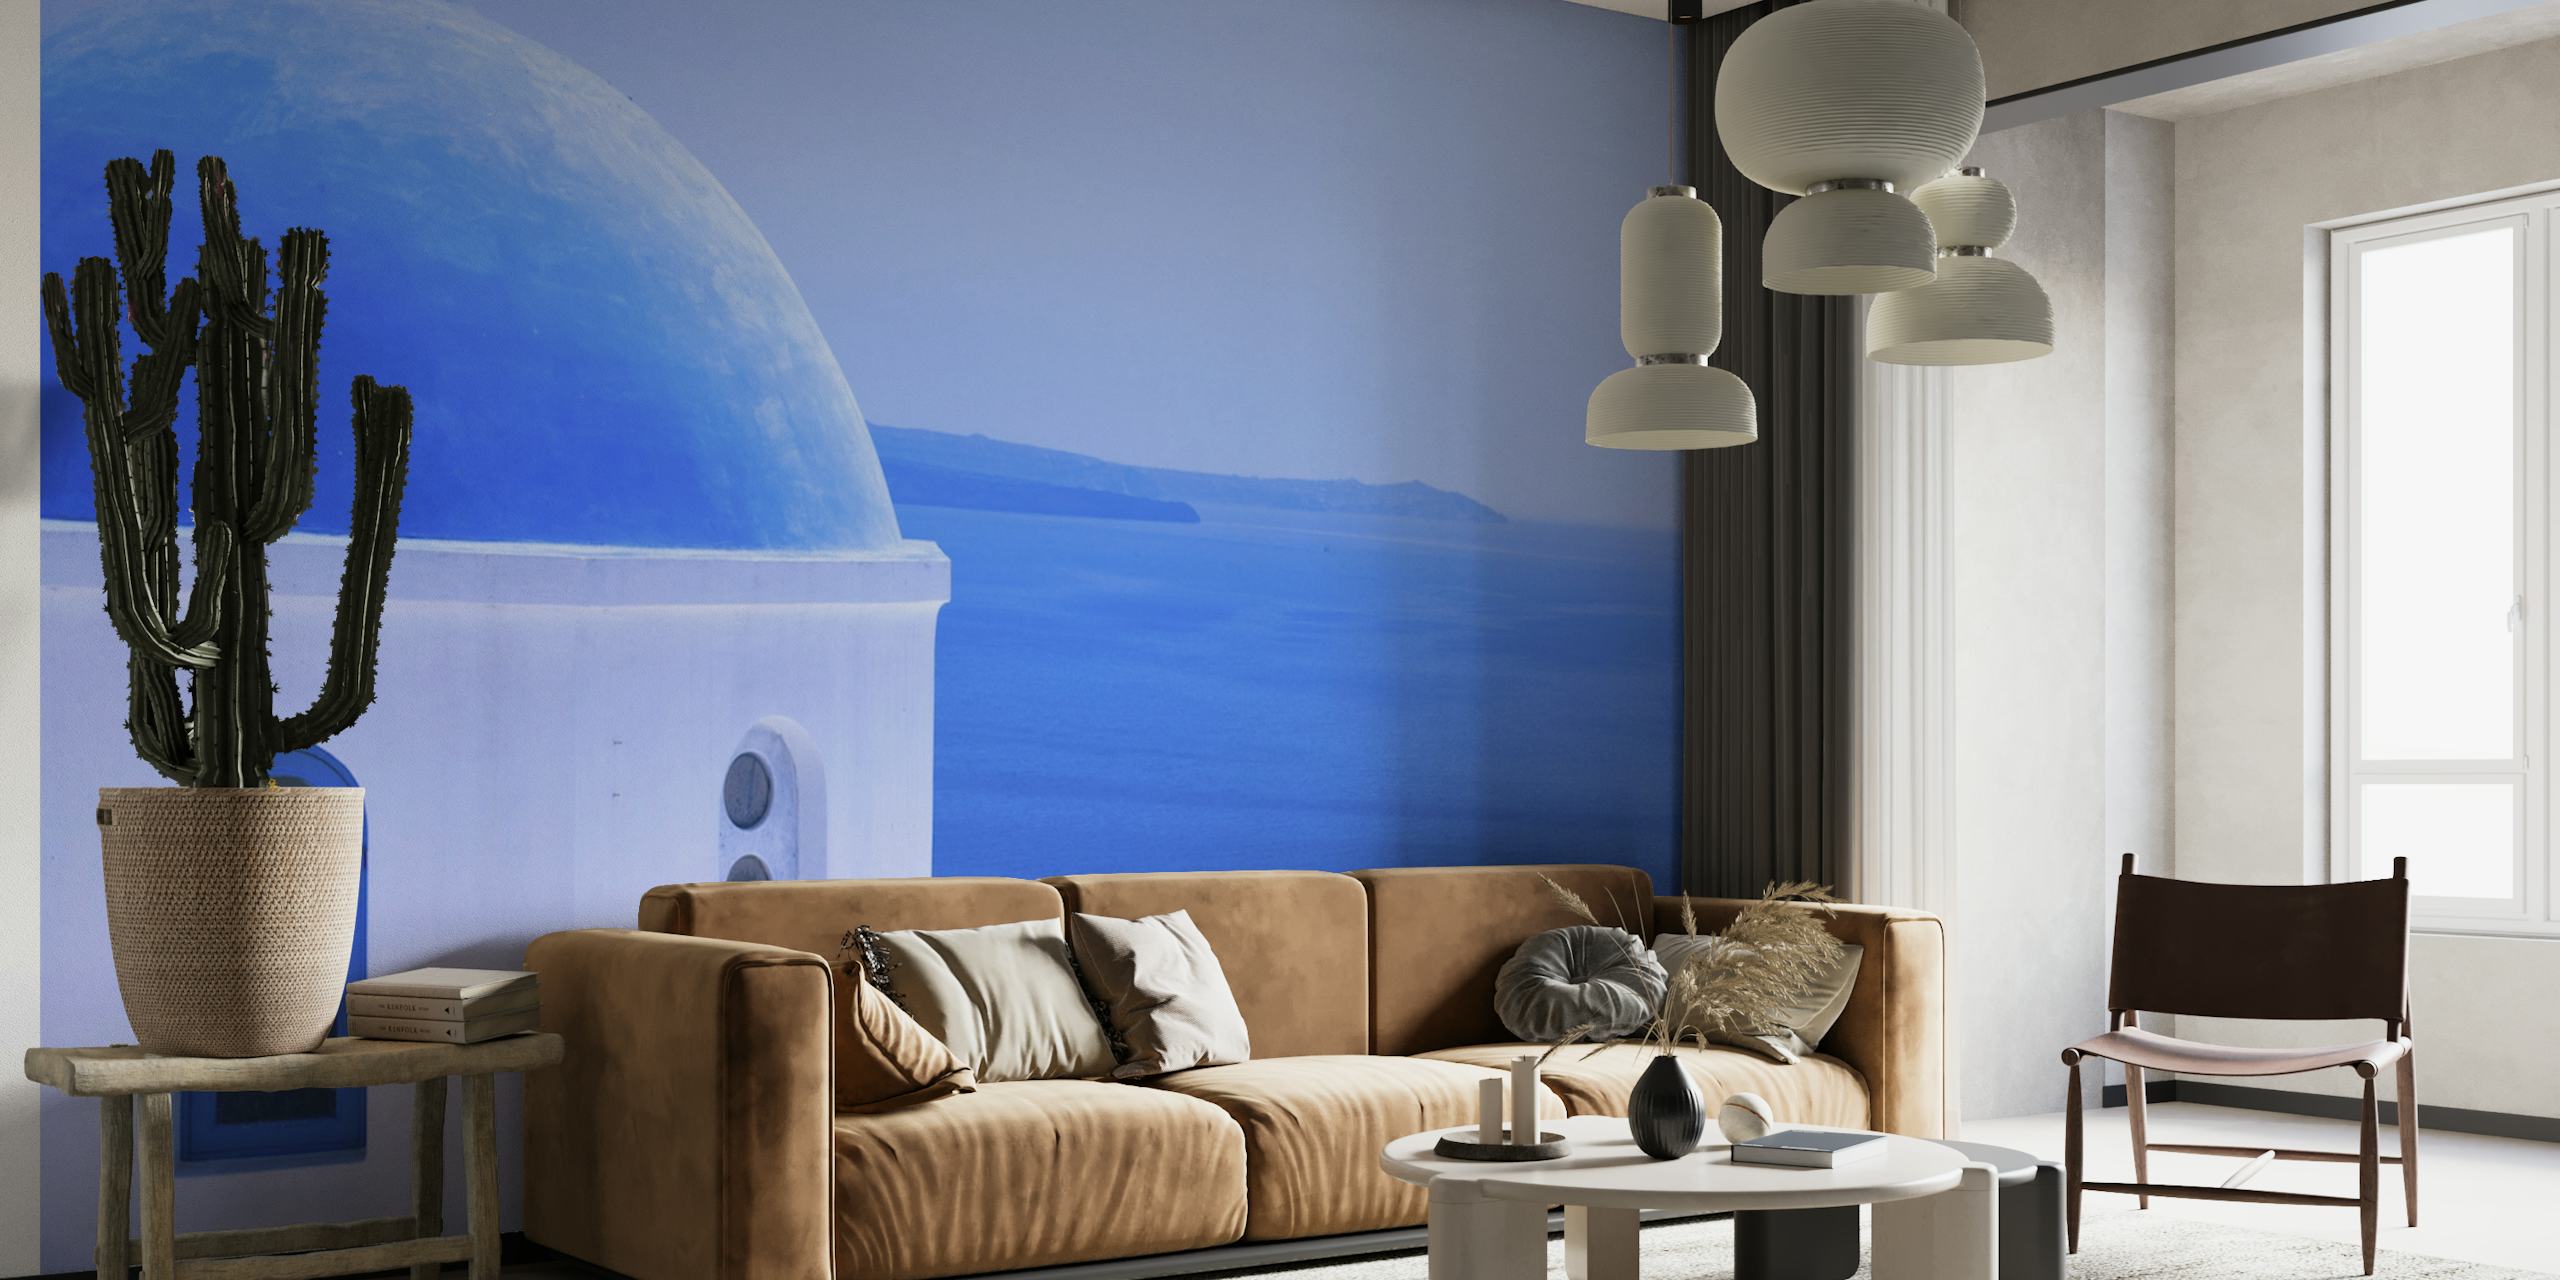 Santorini Island wall mural featuring iconic blue domed church and sea view